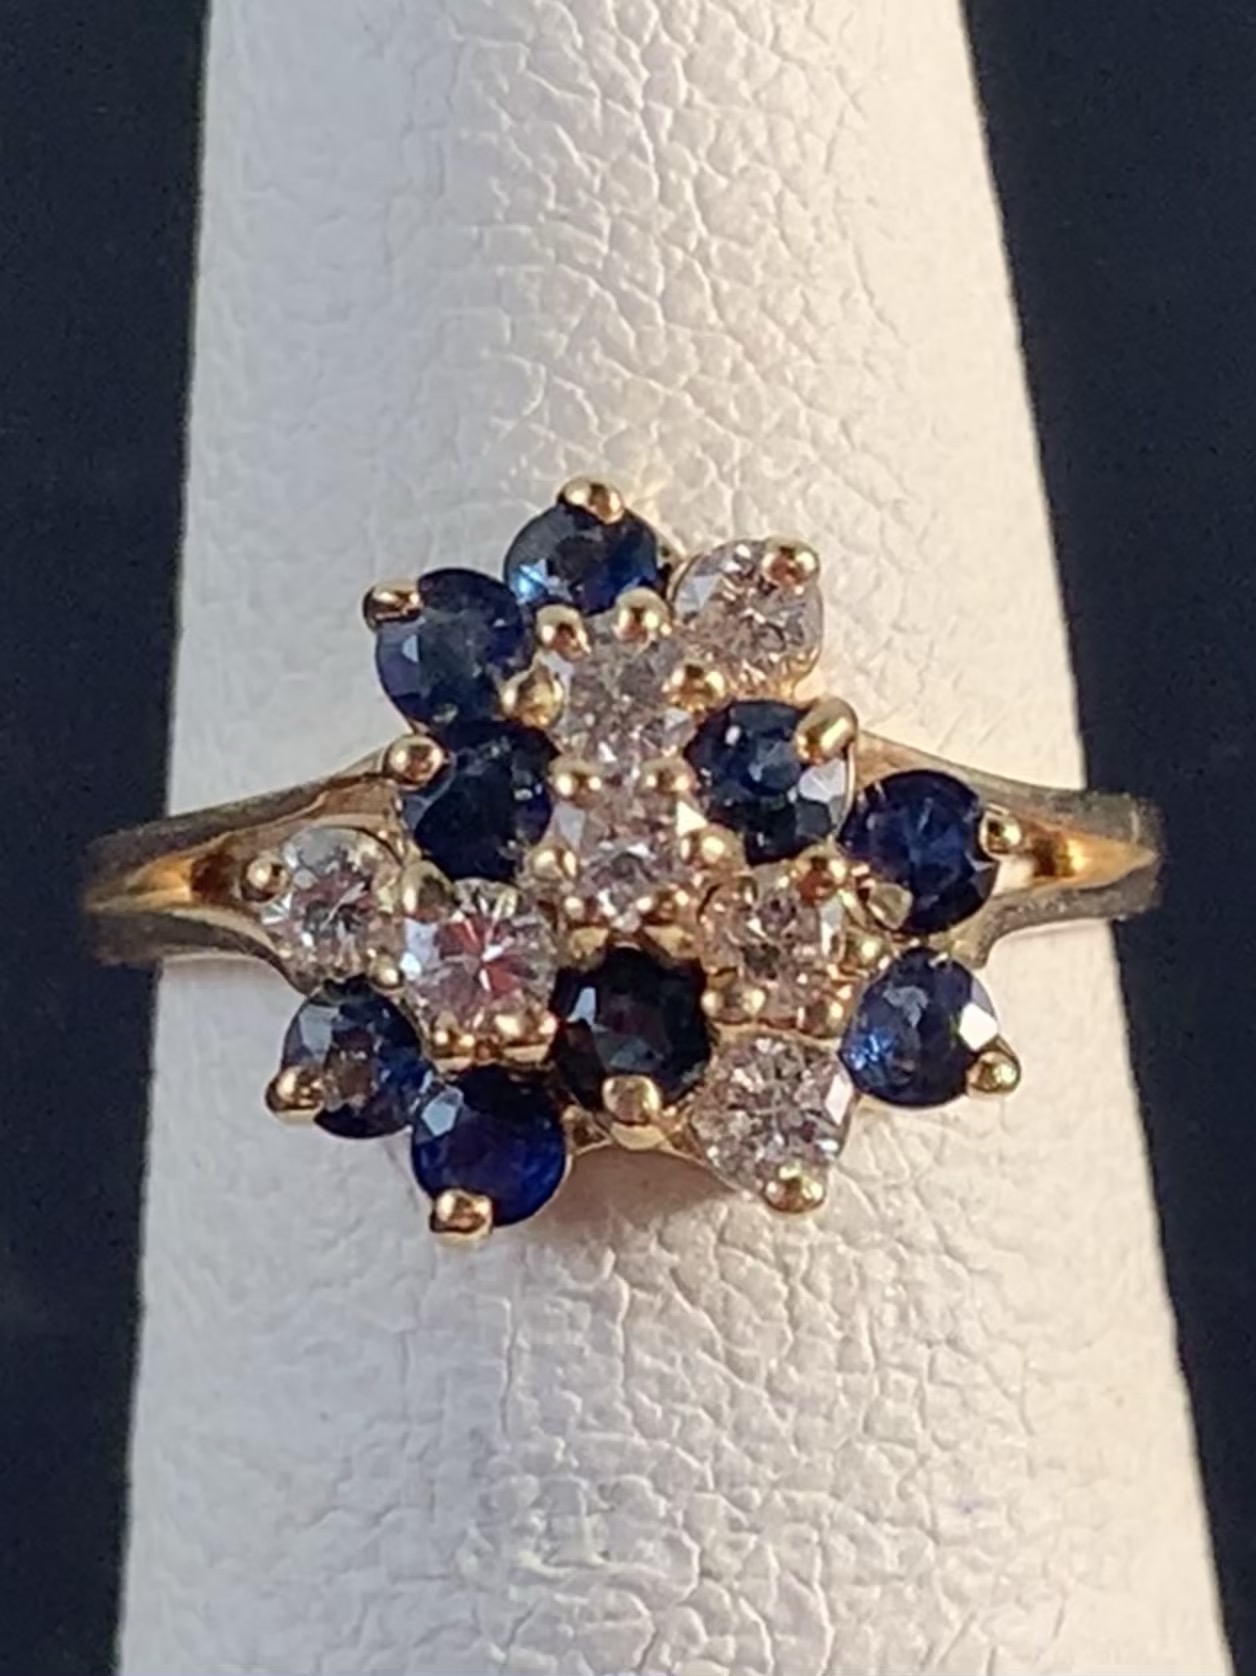 9 Blue Sapphire & 7 Diamond Cocktail Ring
Diamond total approximately .40 caratst and
Sapphires total approximately .70 carats.
Size 4.75. Can be sized up to 6.5

$590